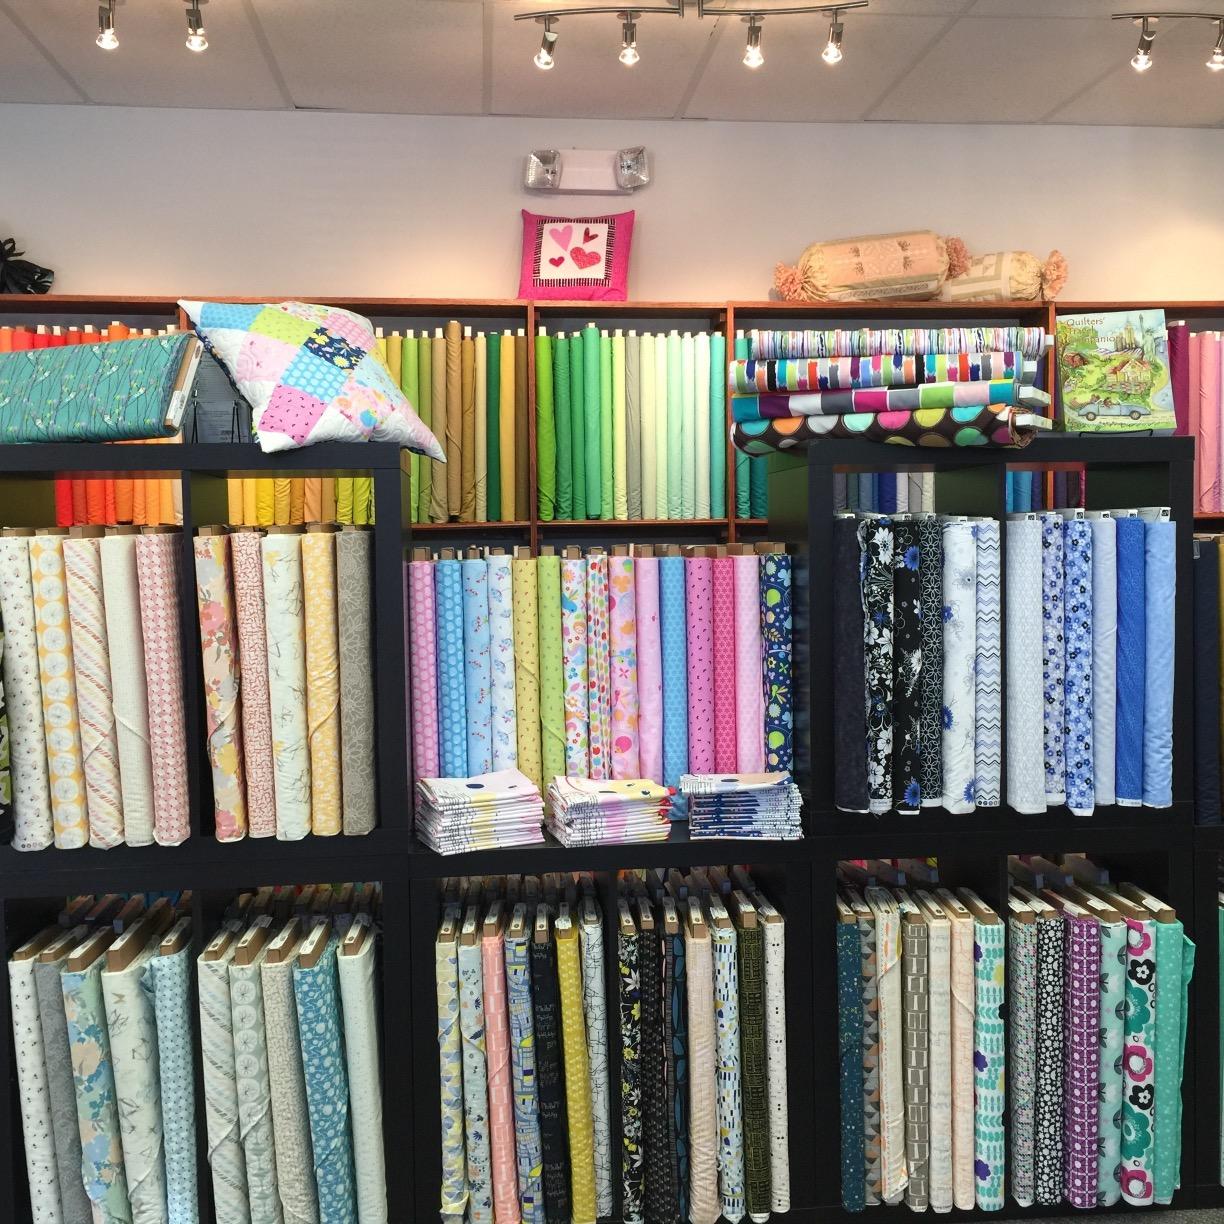 Wandering Stitches is your BERNINA Dealer in Orlando FL, Close to the Airport and attractions, lots of fabric and classes!